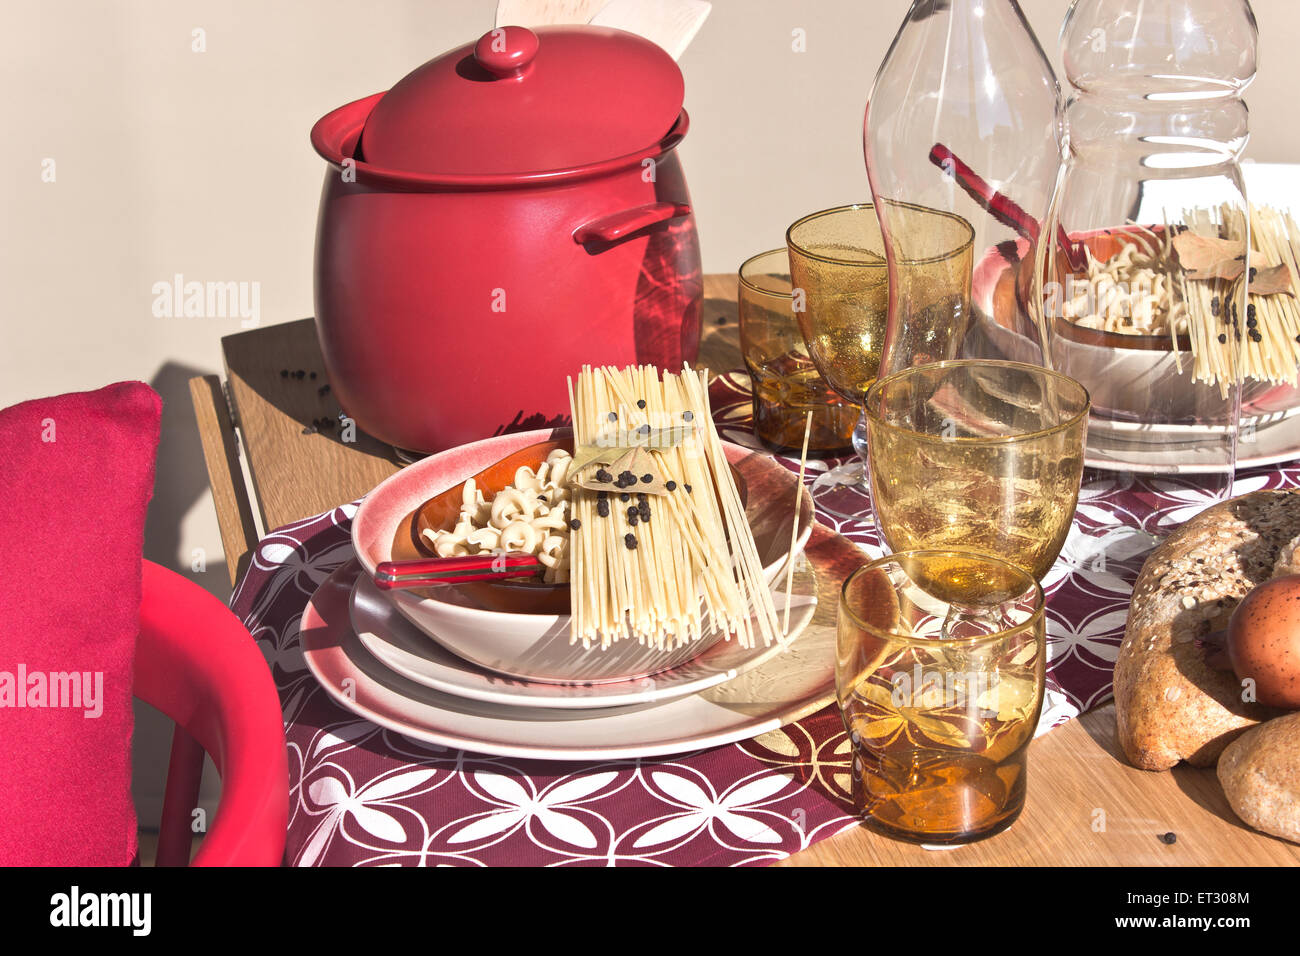 Table setting with dry spaghetti on plates Stock Photo